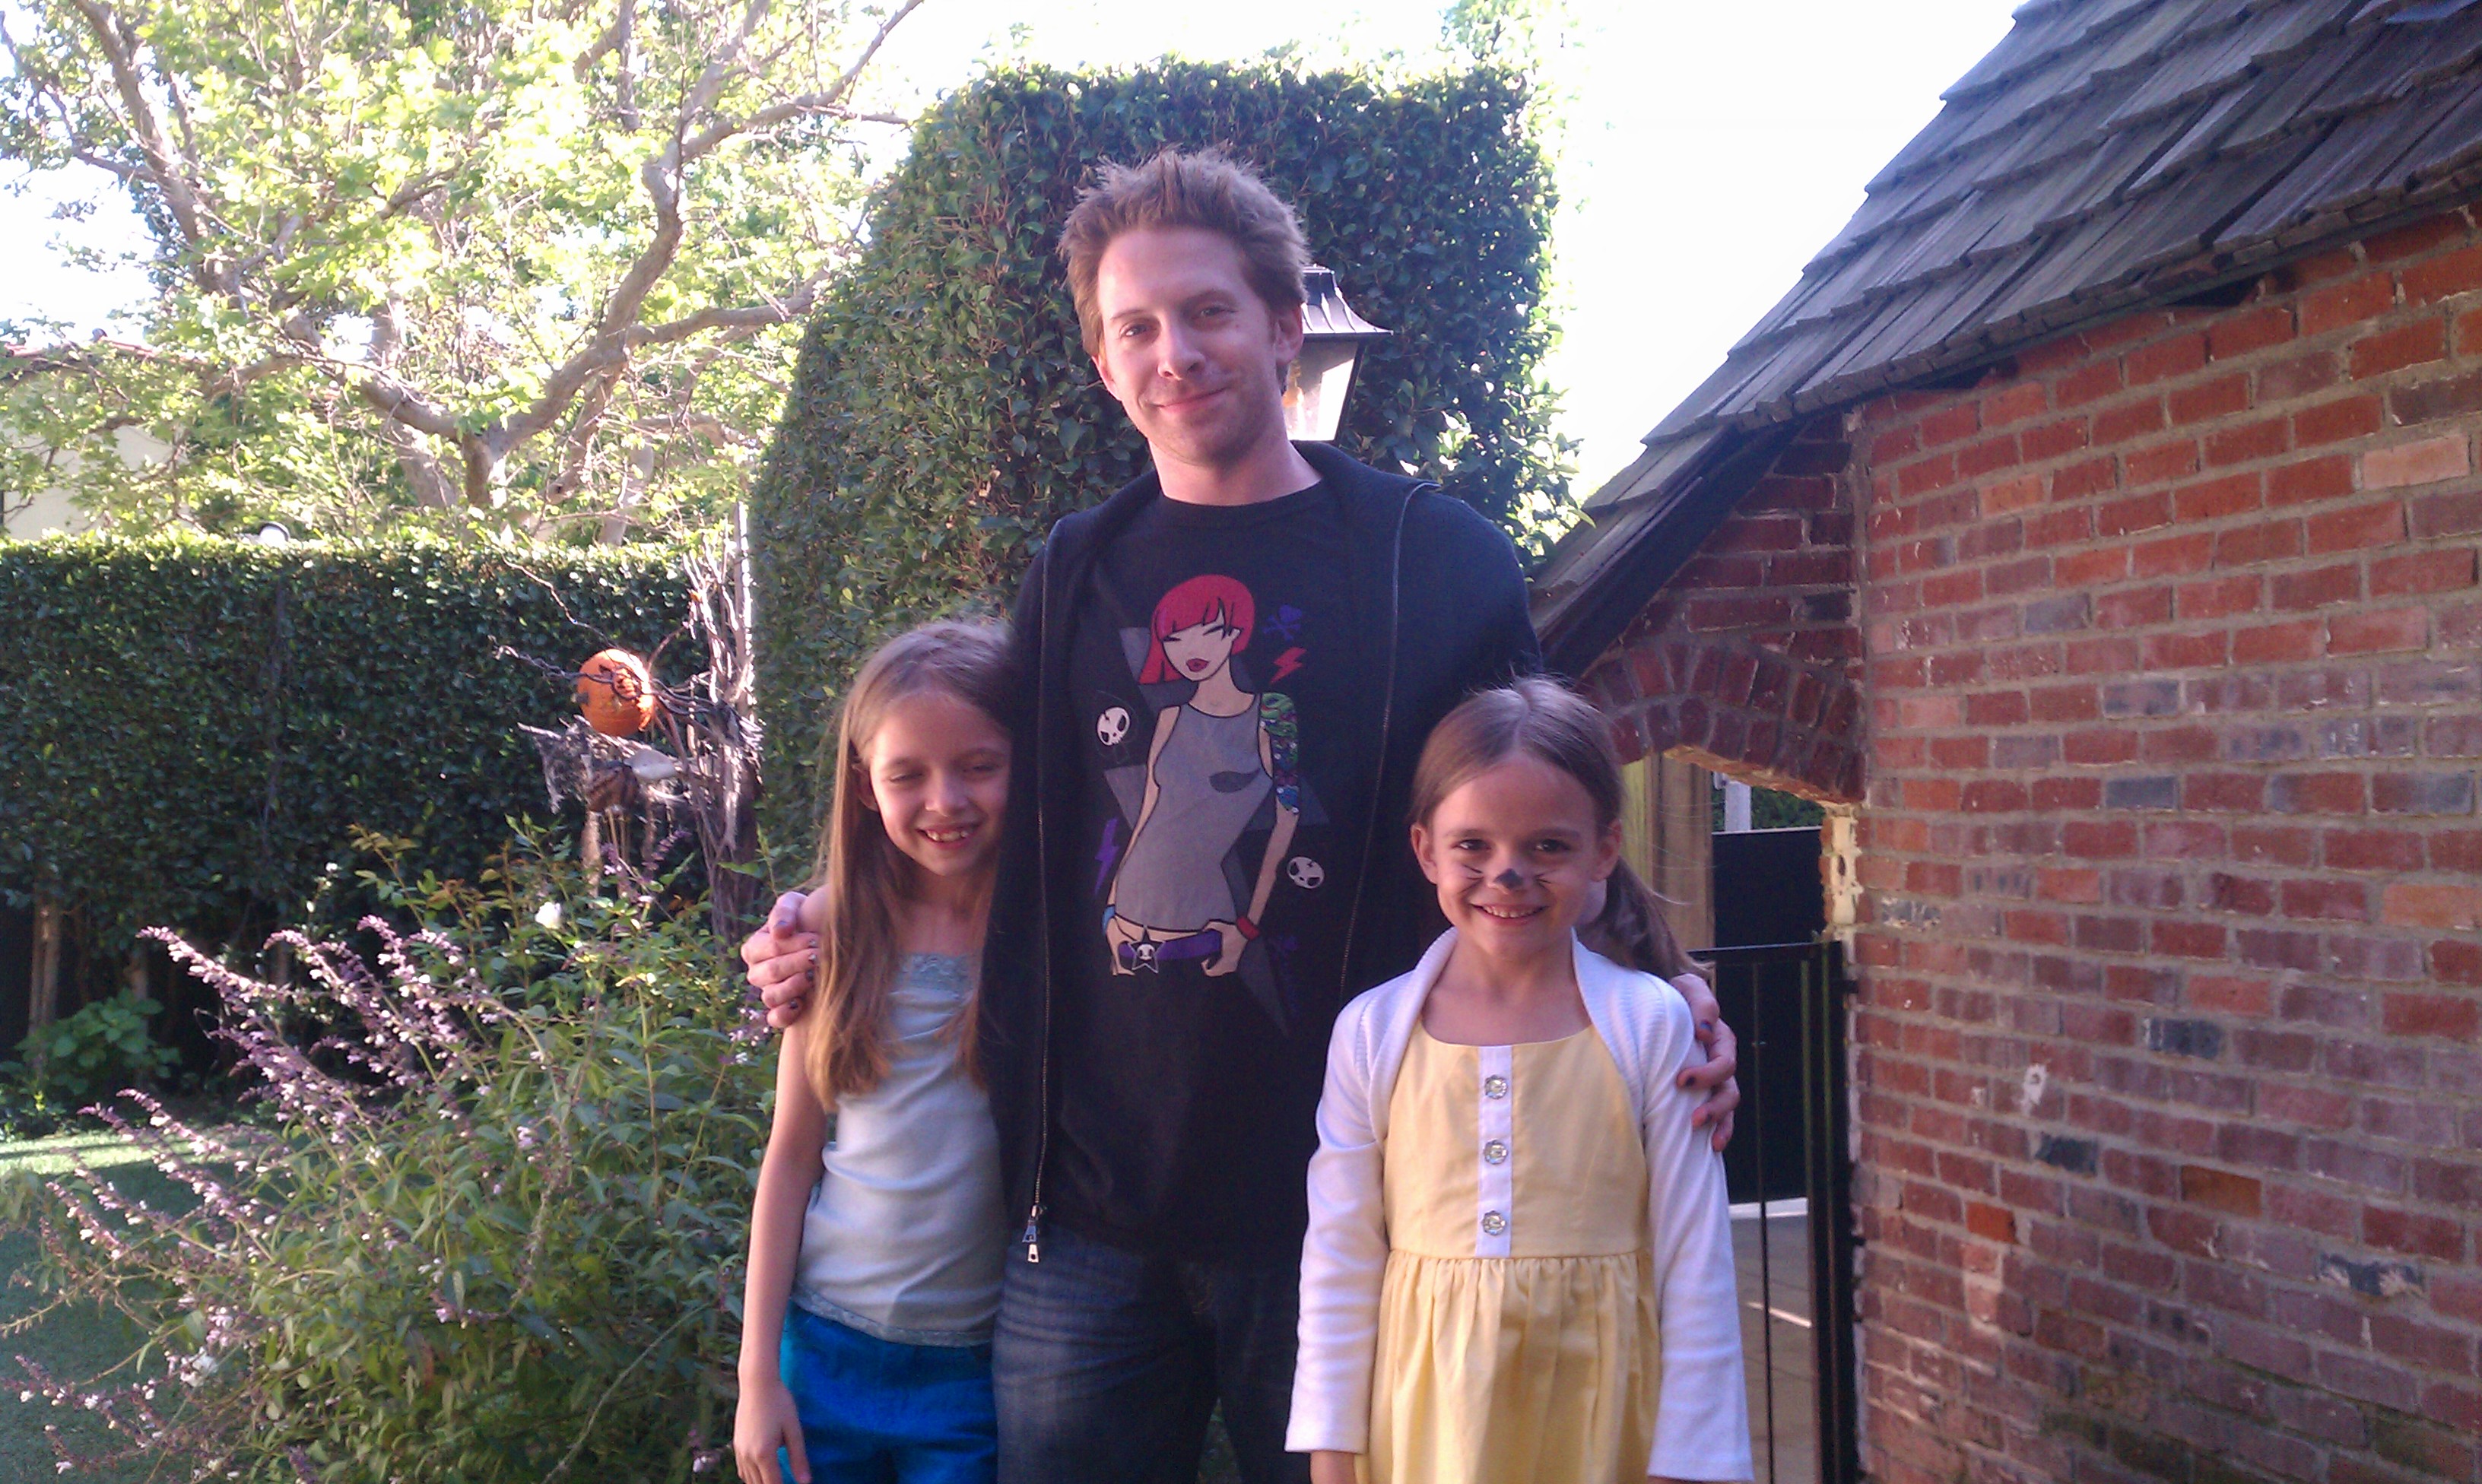 Mykayla and sister Hannah on the set of Halfway to Halloween with Seth Green.